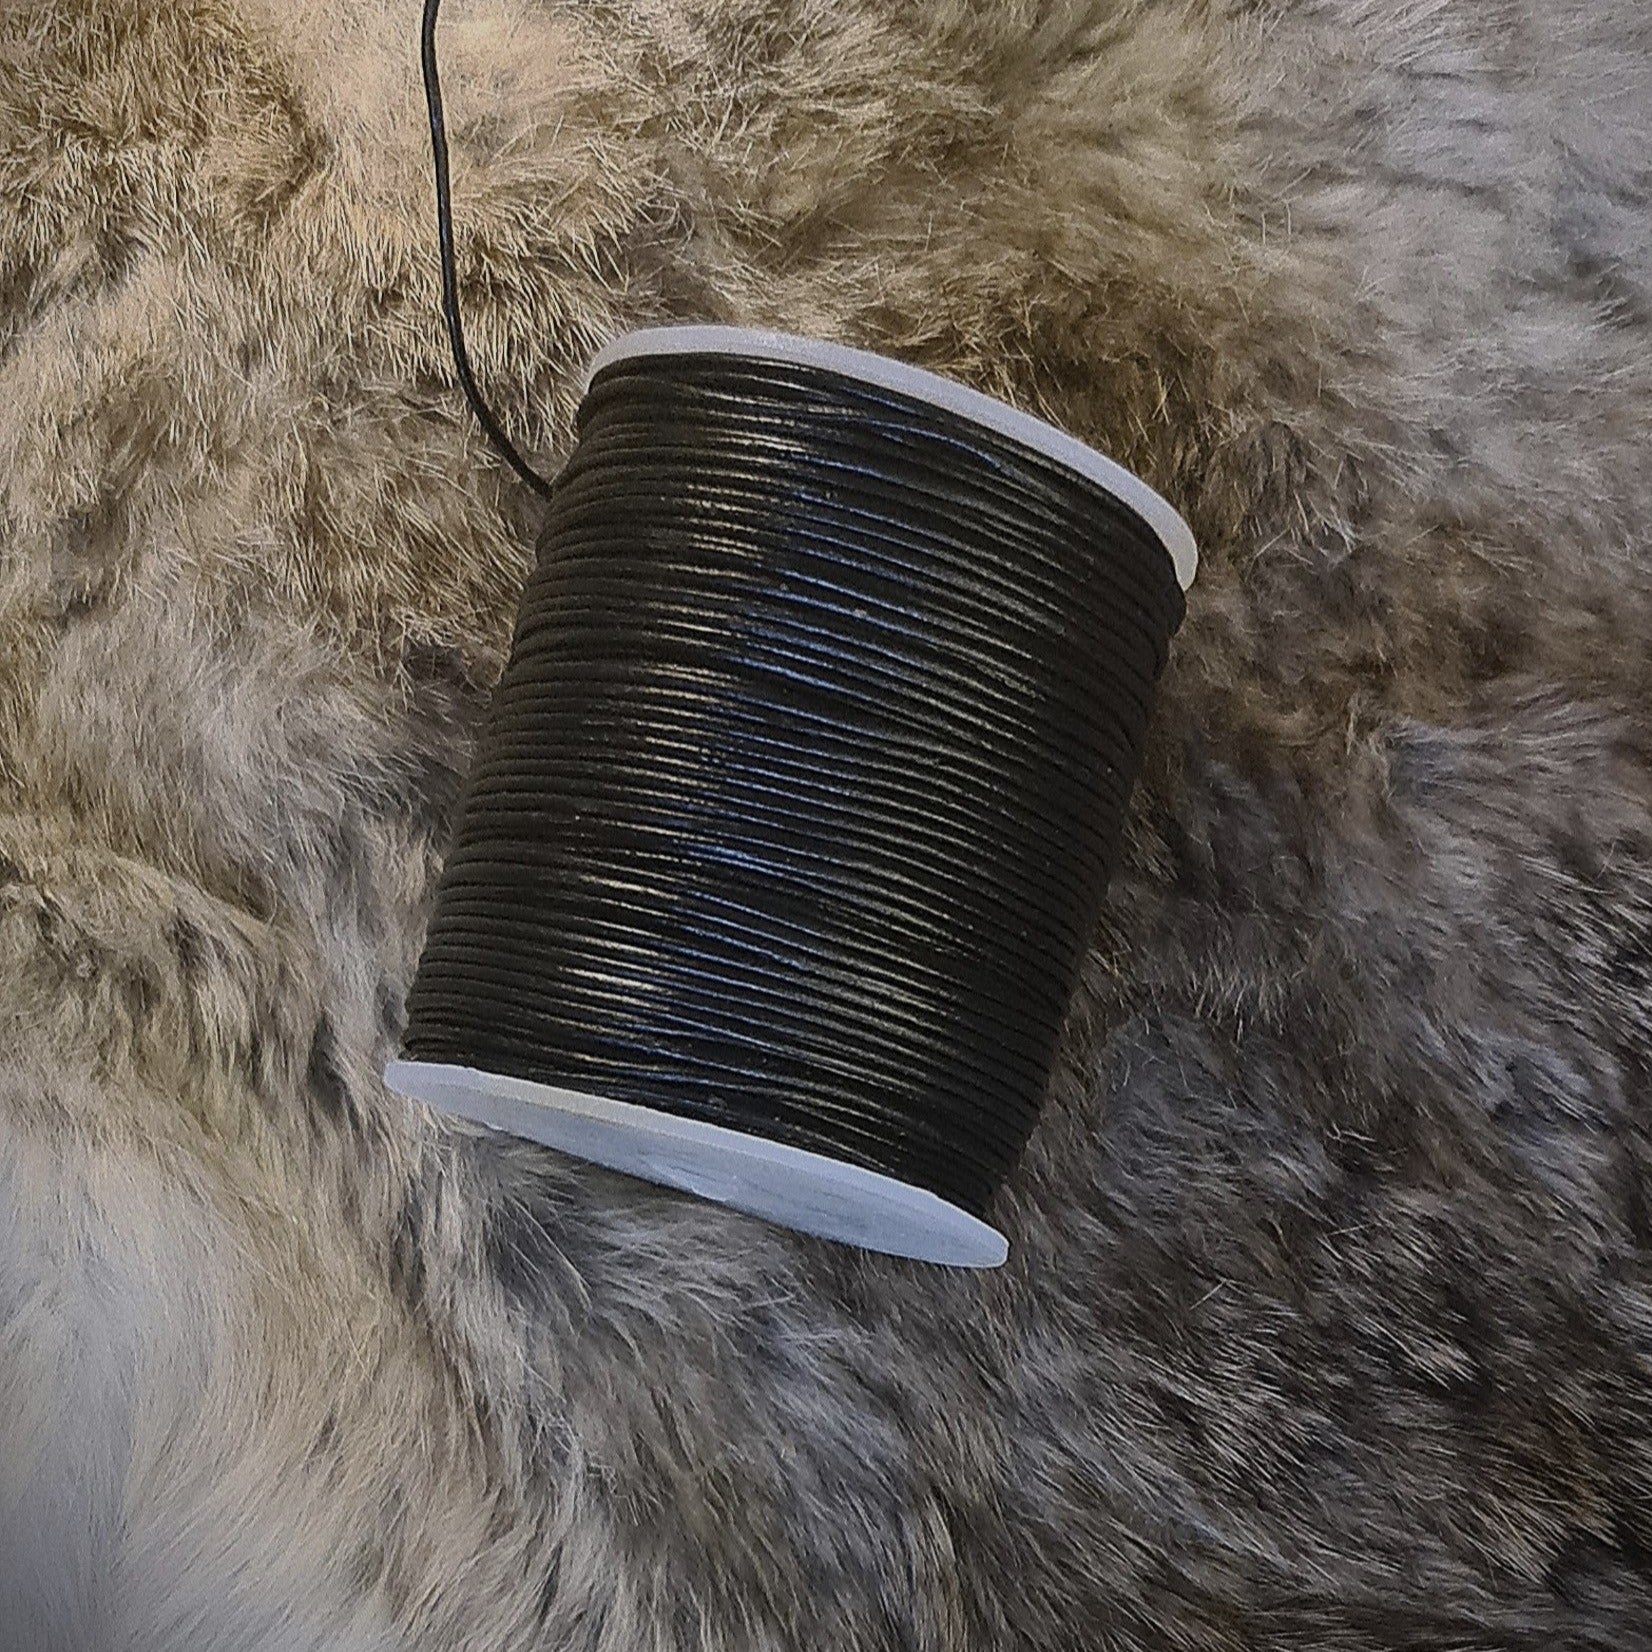 Leather strap on a large roll